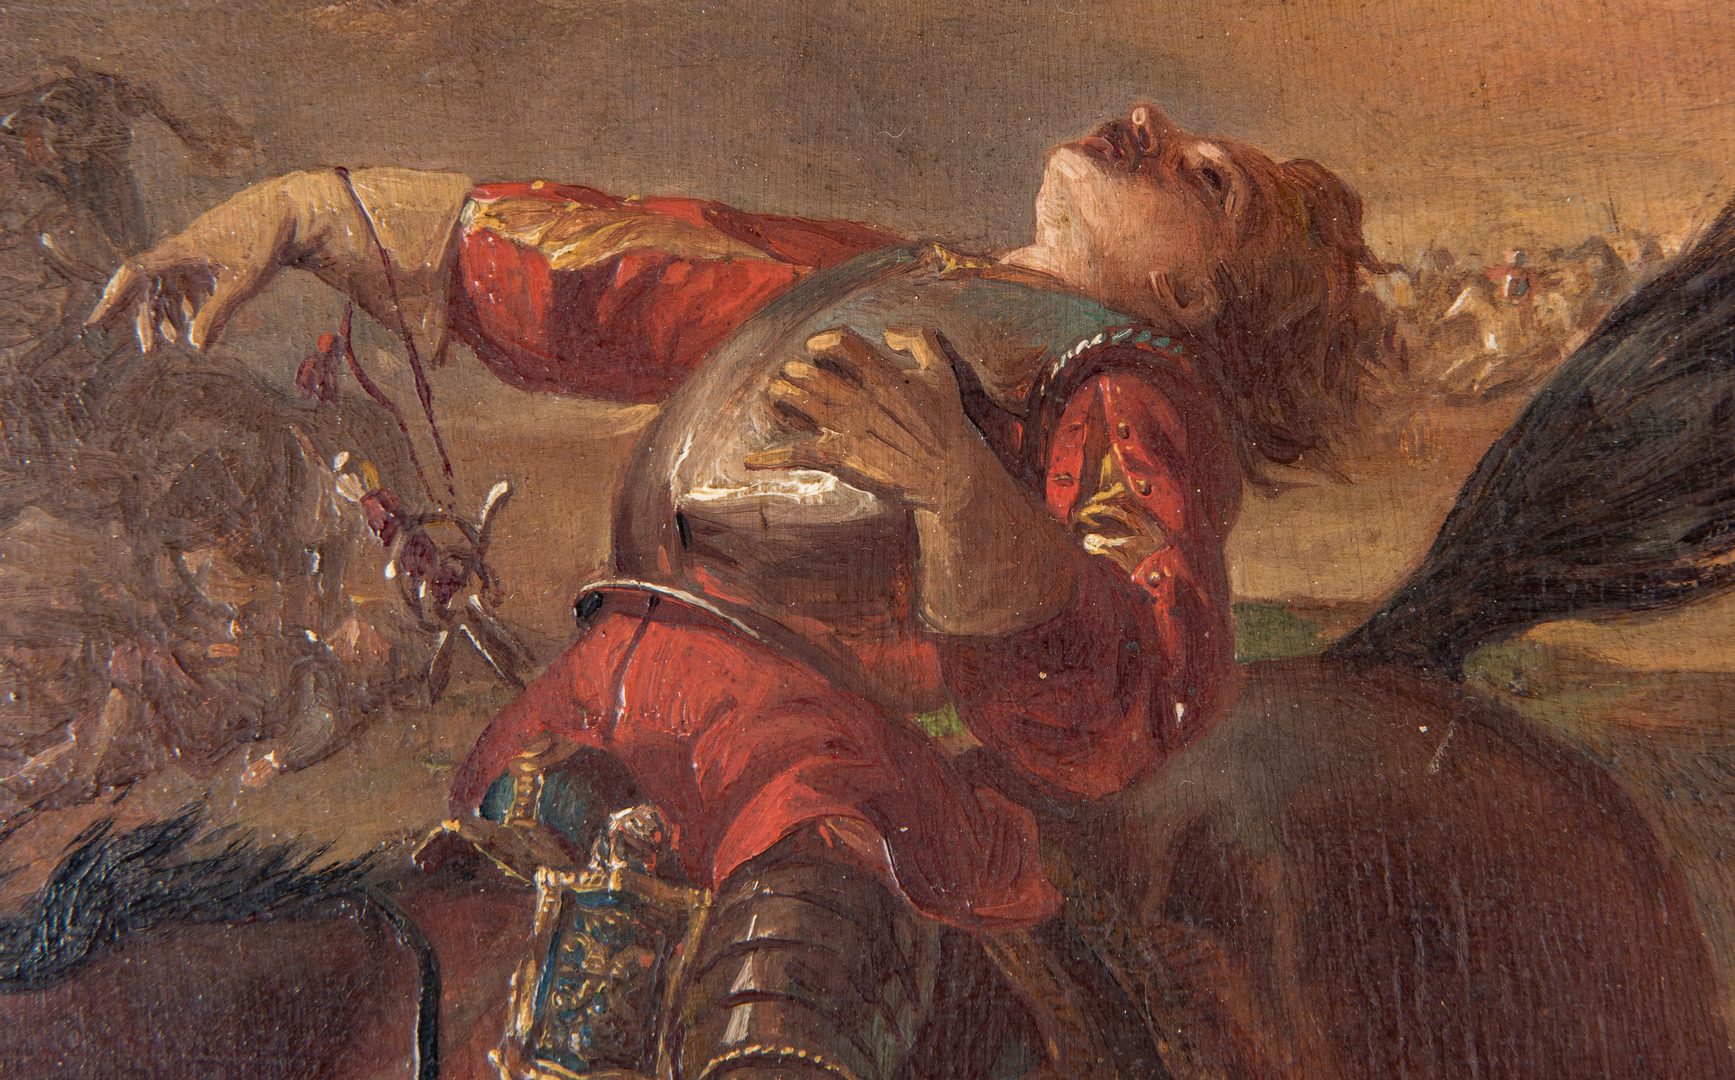 Lot 357: English School Painting, "Wounded in Battle"